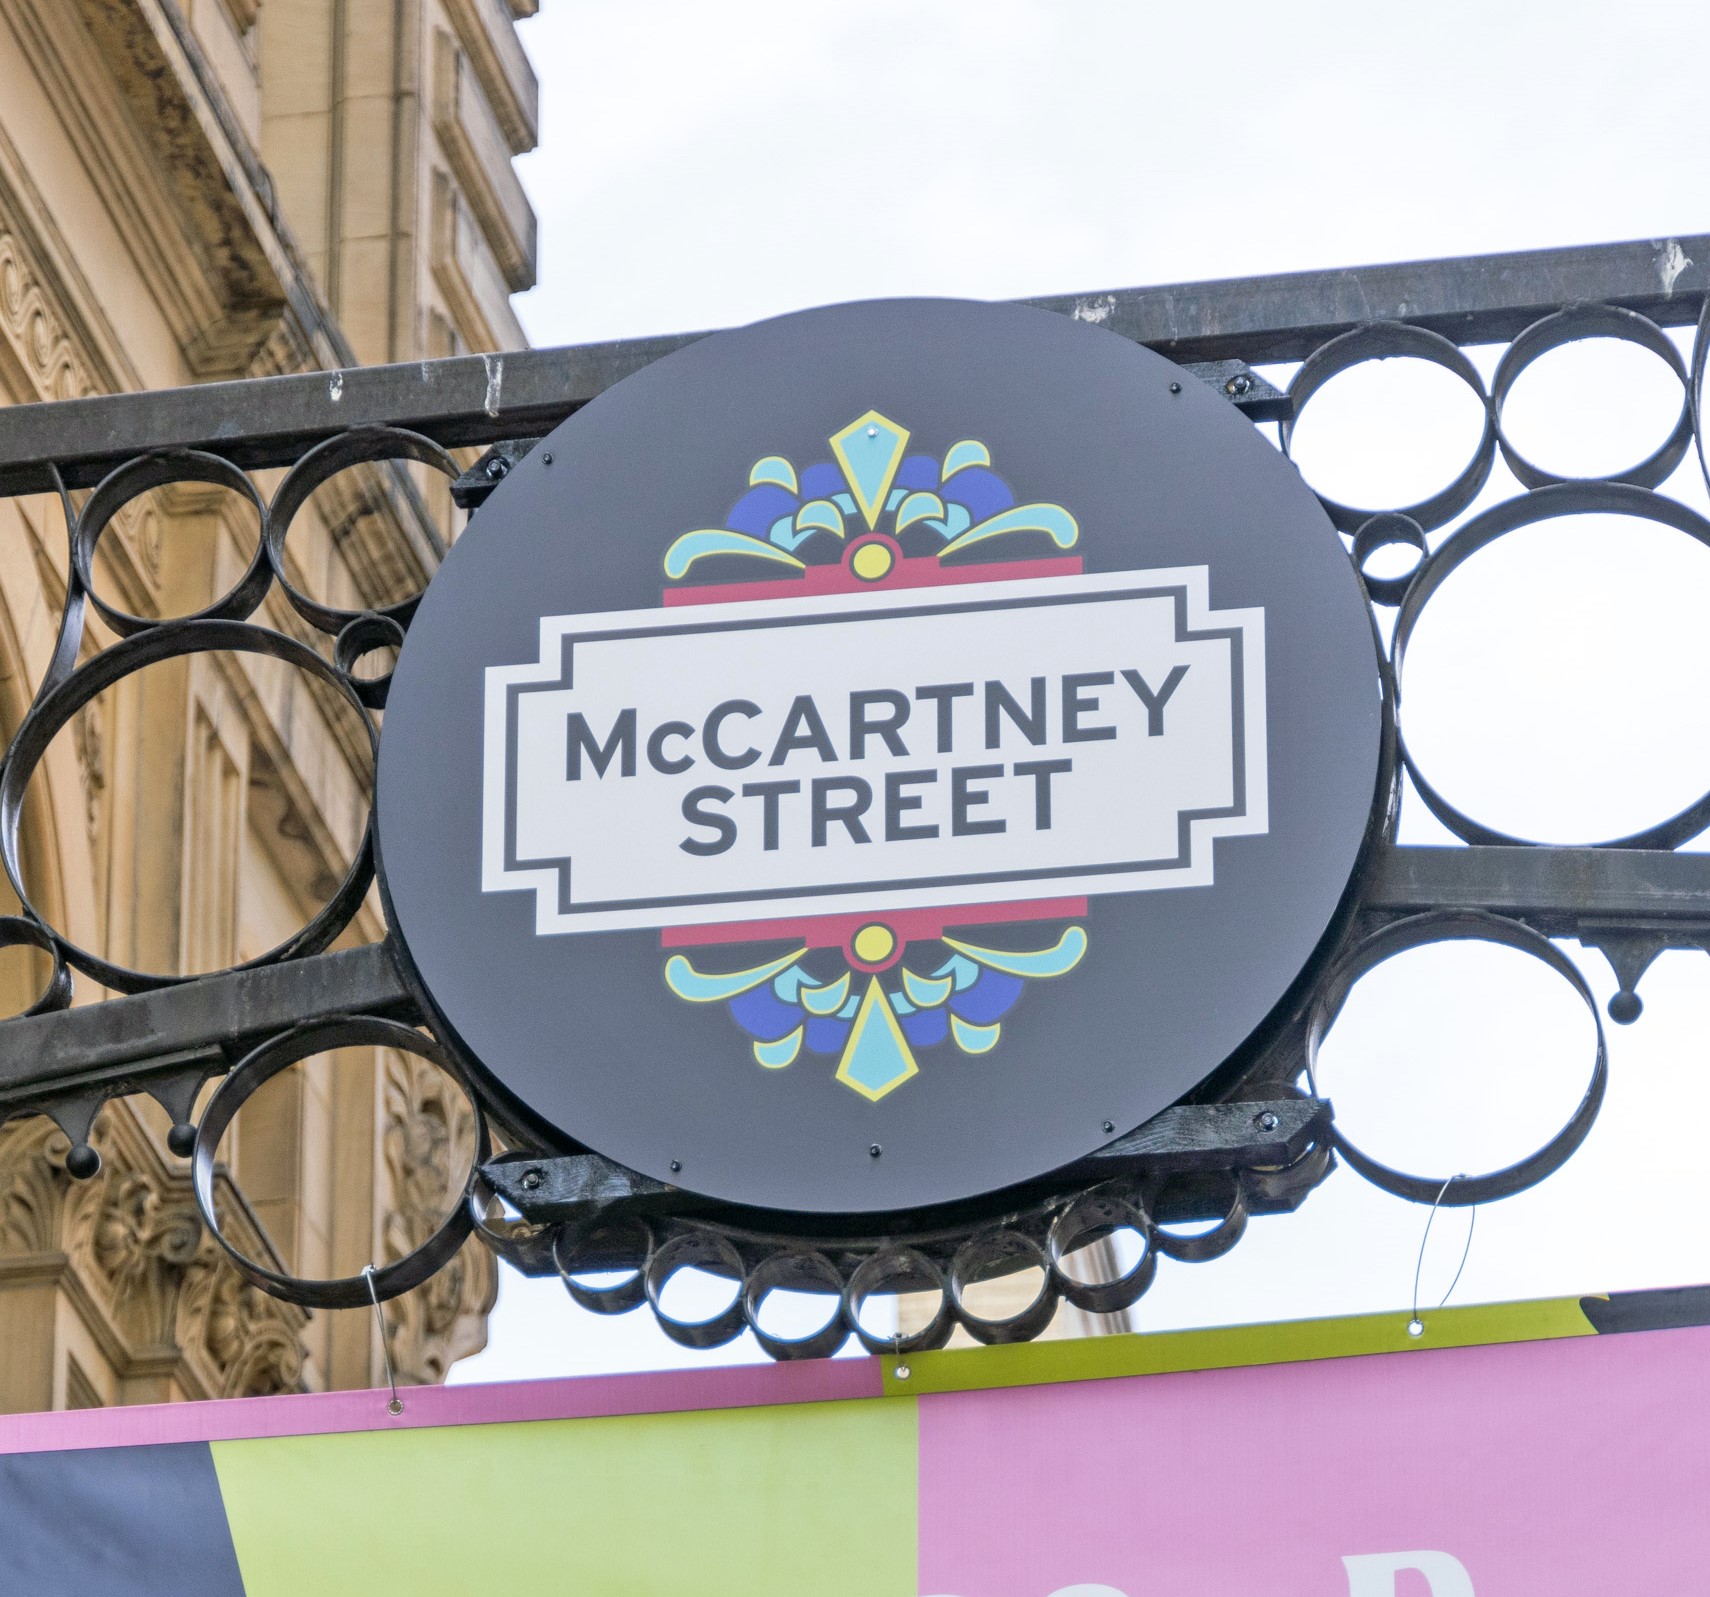 2x McCartney Street roundels (800mm diameter) used to overlay the Mathew St circulars on the